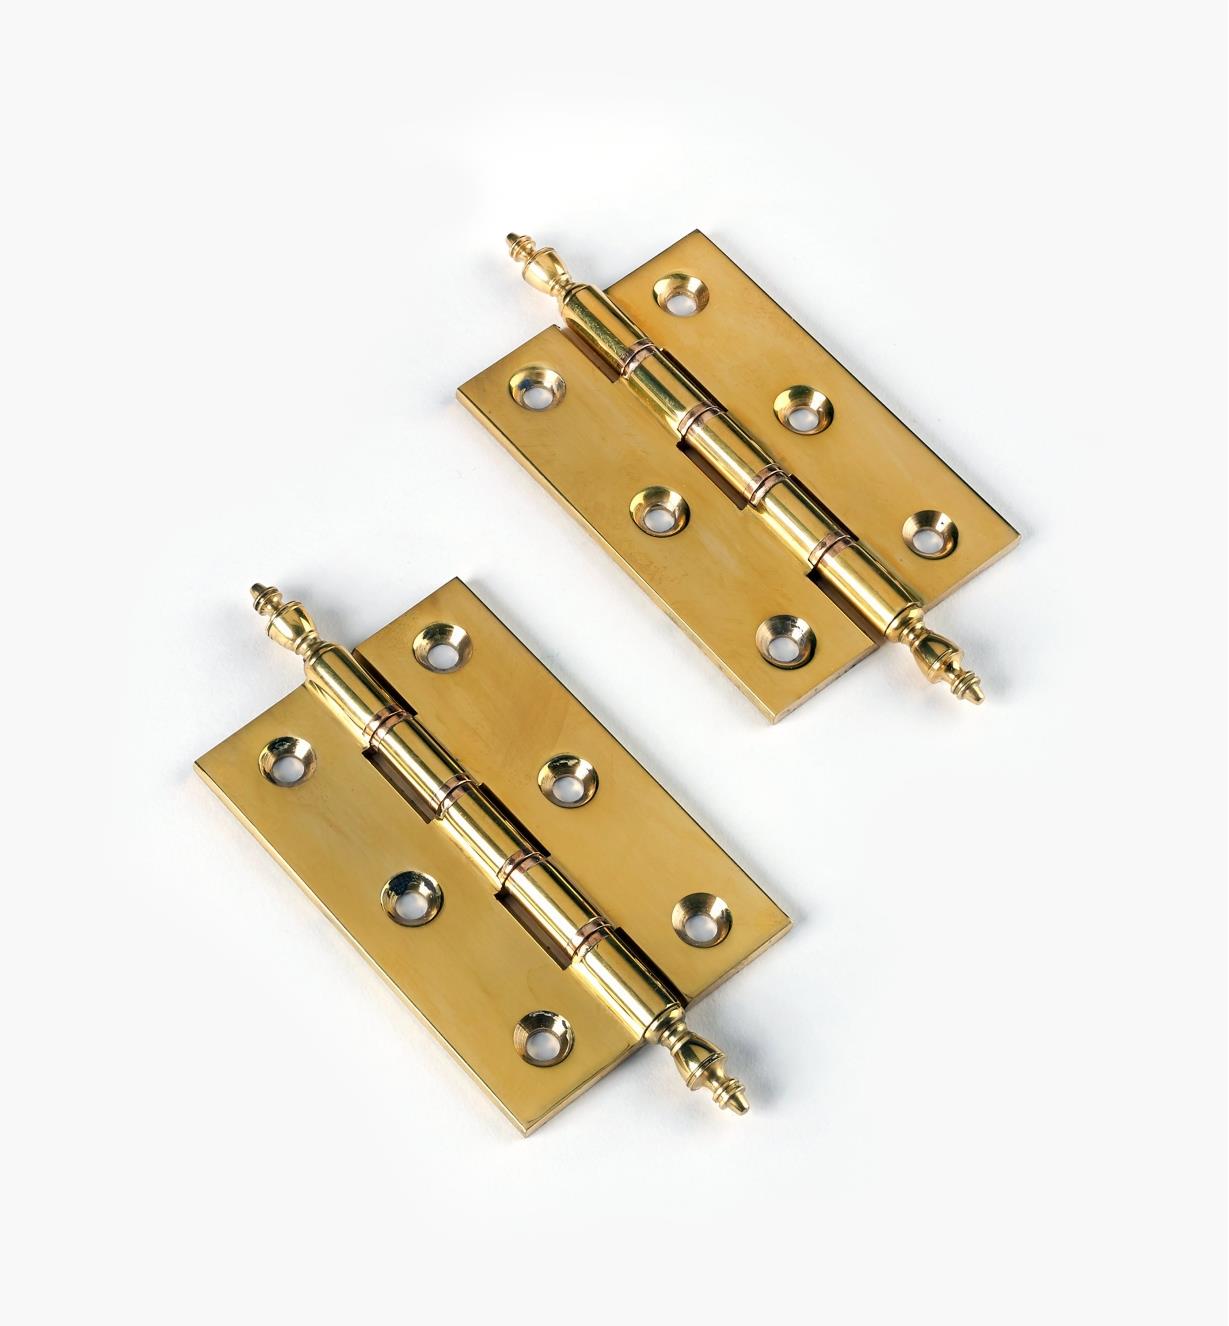 00D0901 - 3" x 2" Extruded Brass Fast-Pin Finial Hinges, pr.